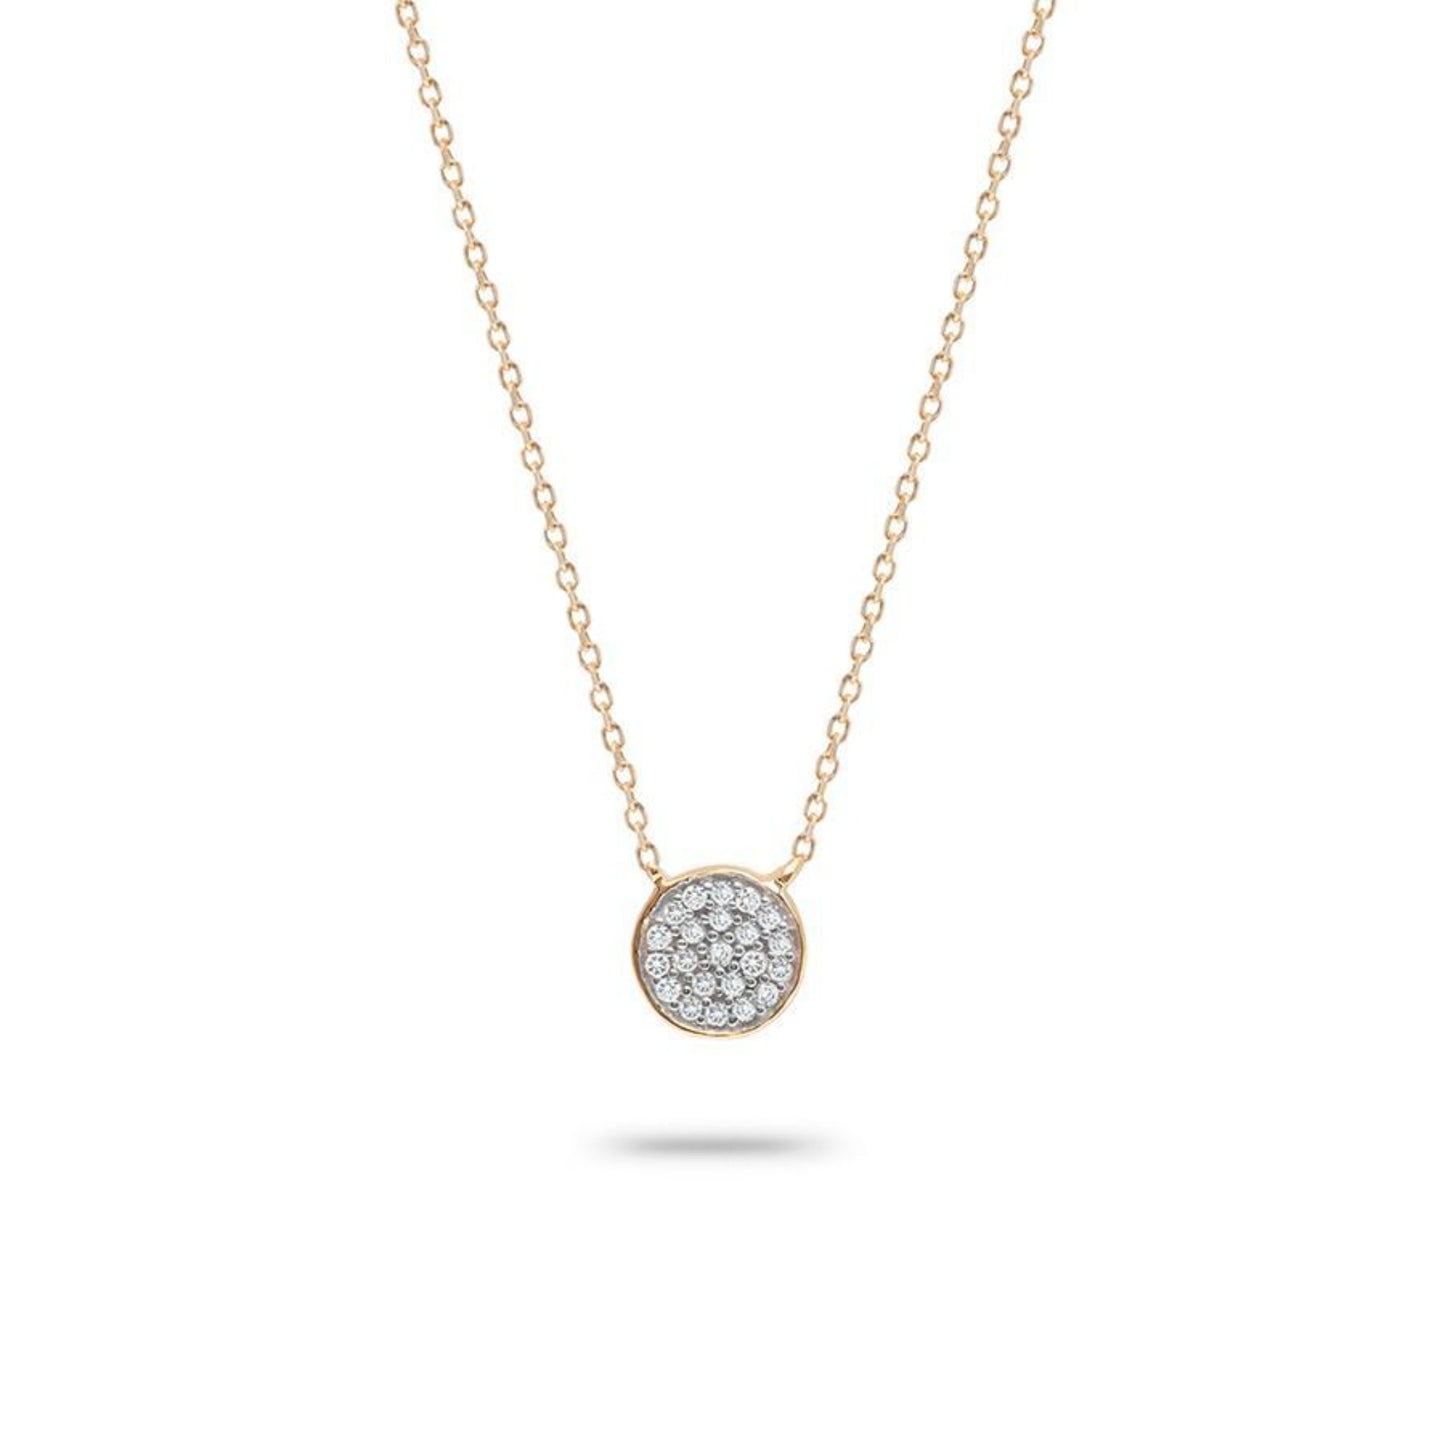 14k yellow gold pave disc necklace